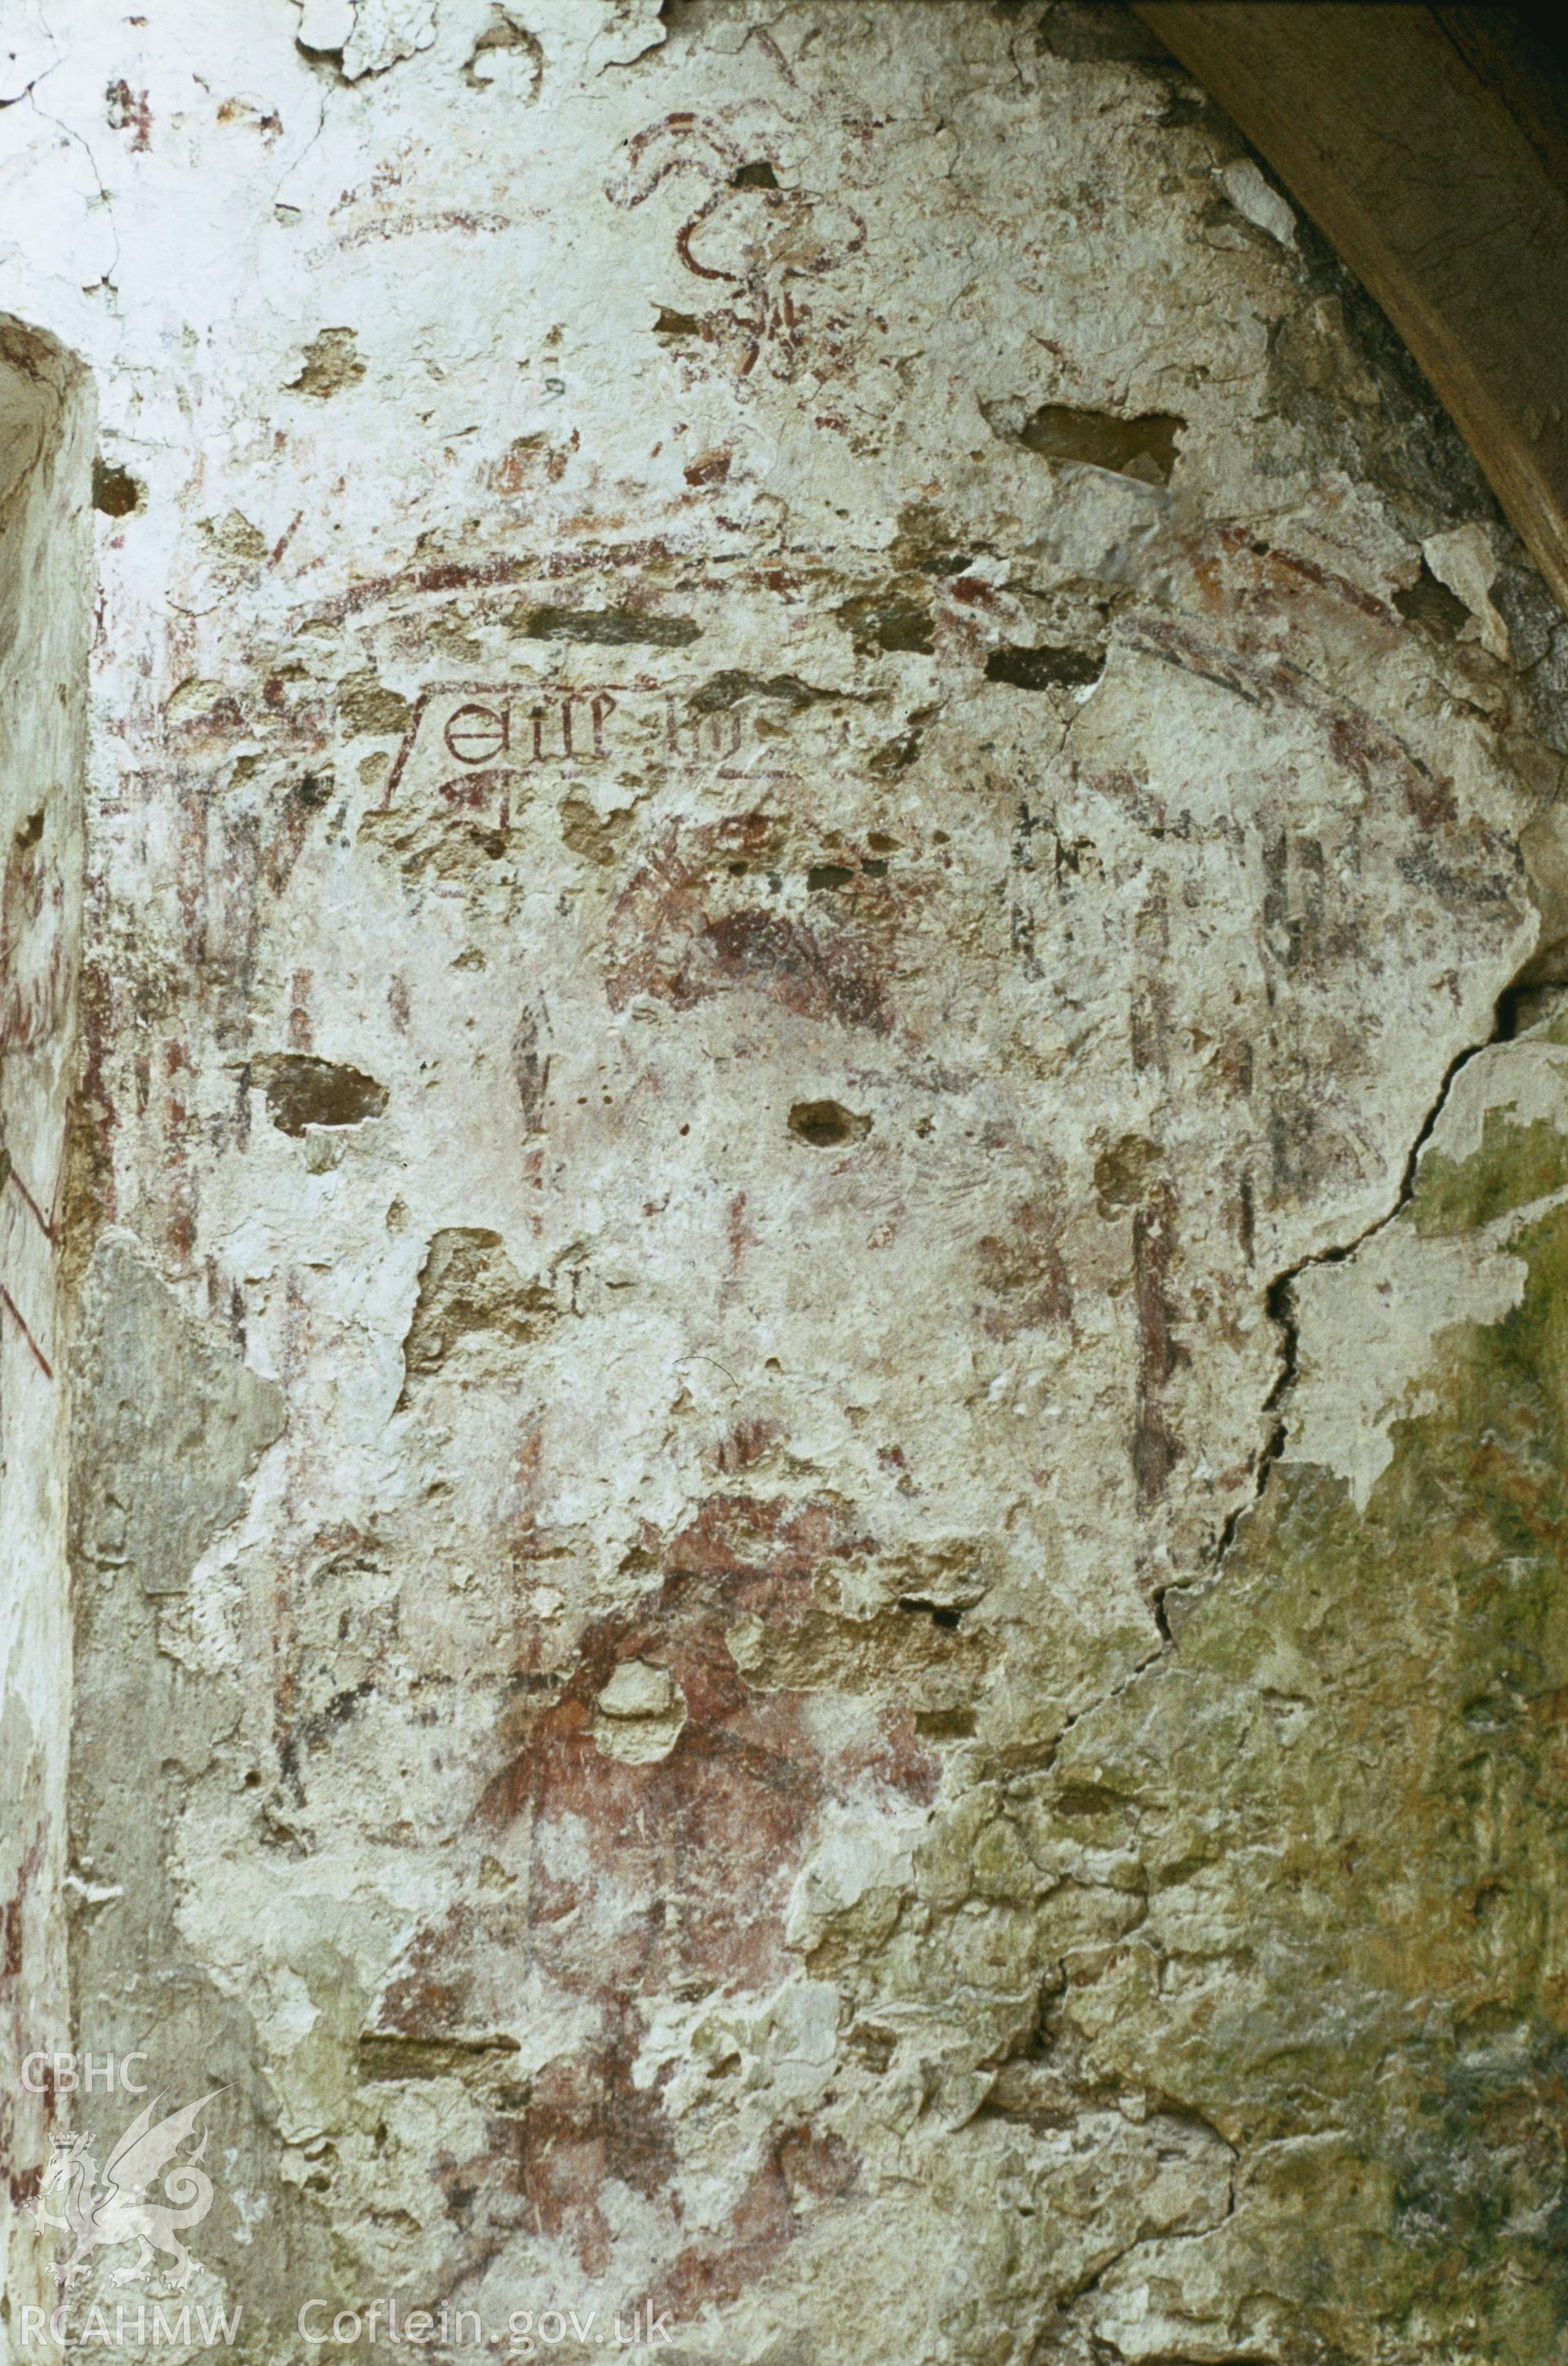 RCAHMW colour transparency showing wallpainting at St Teilo's Church, Llandeilo Talybont, photographed in 1984.